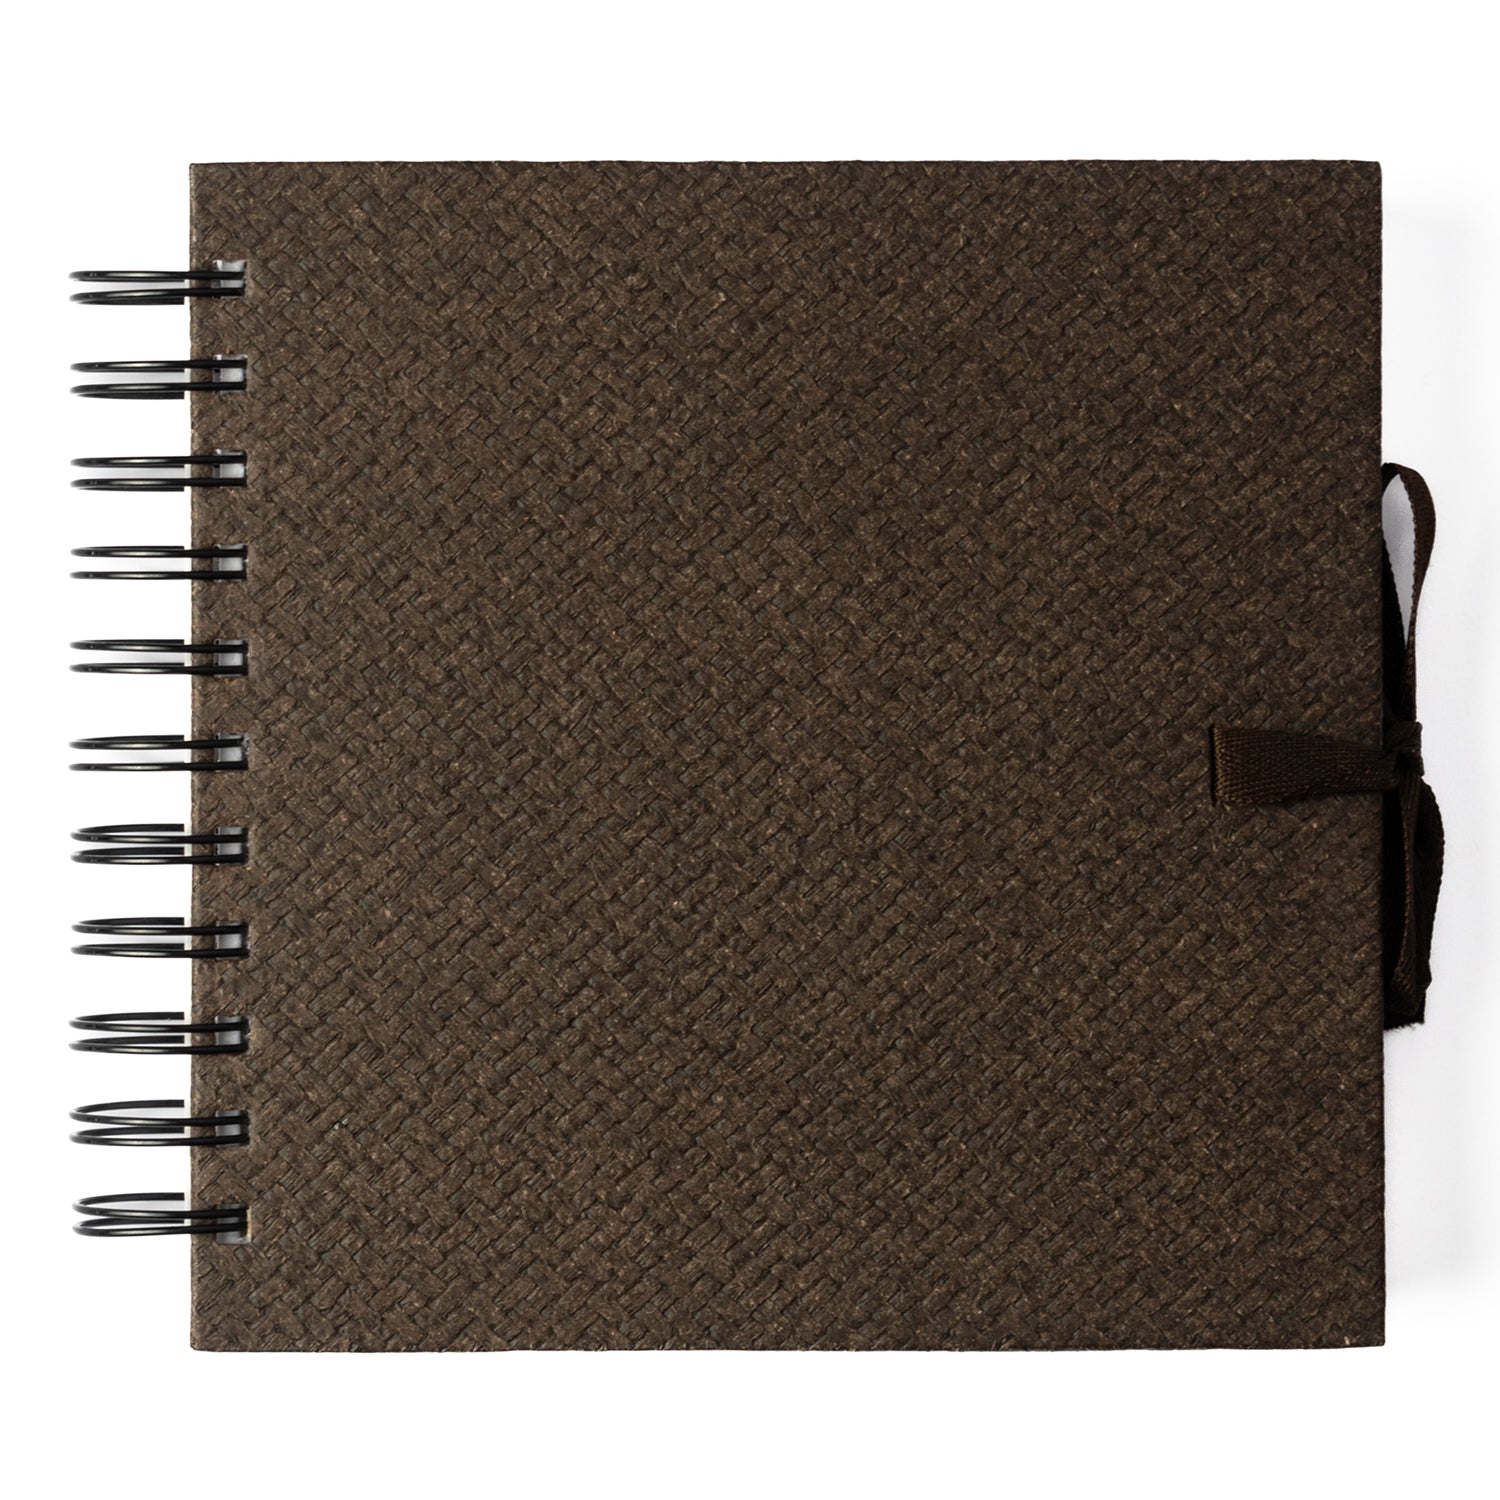 Watercolour Book | 6" X 6" | Wire-O | Cold Pressed | Natural Shade | 100% Cotton Fibers (Chocolate Brown)